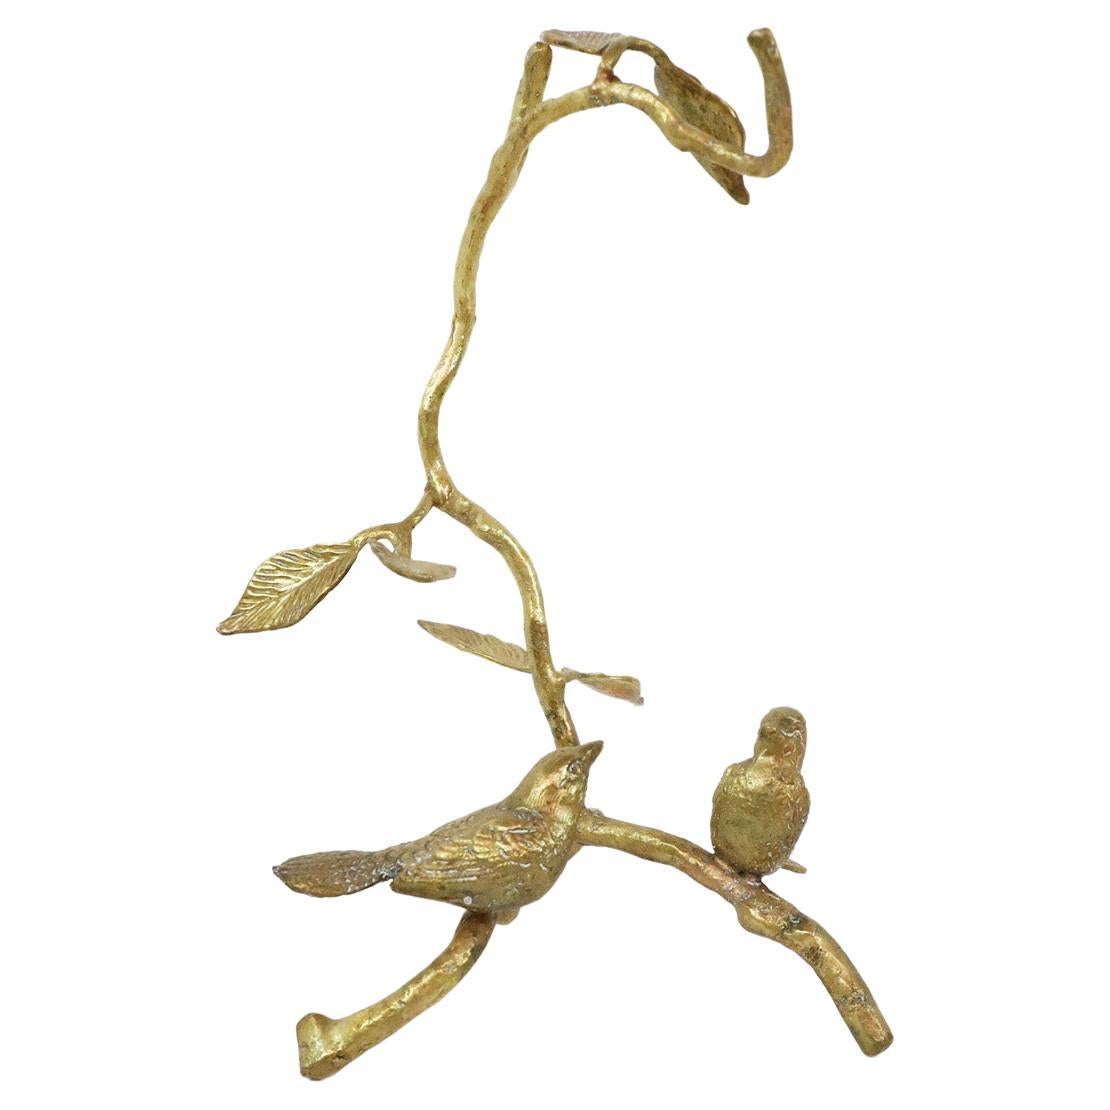 Brass Sculpture in the Manner of Diego Giacometti